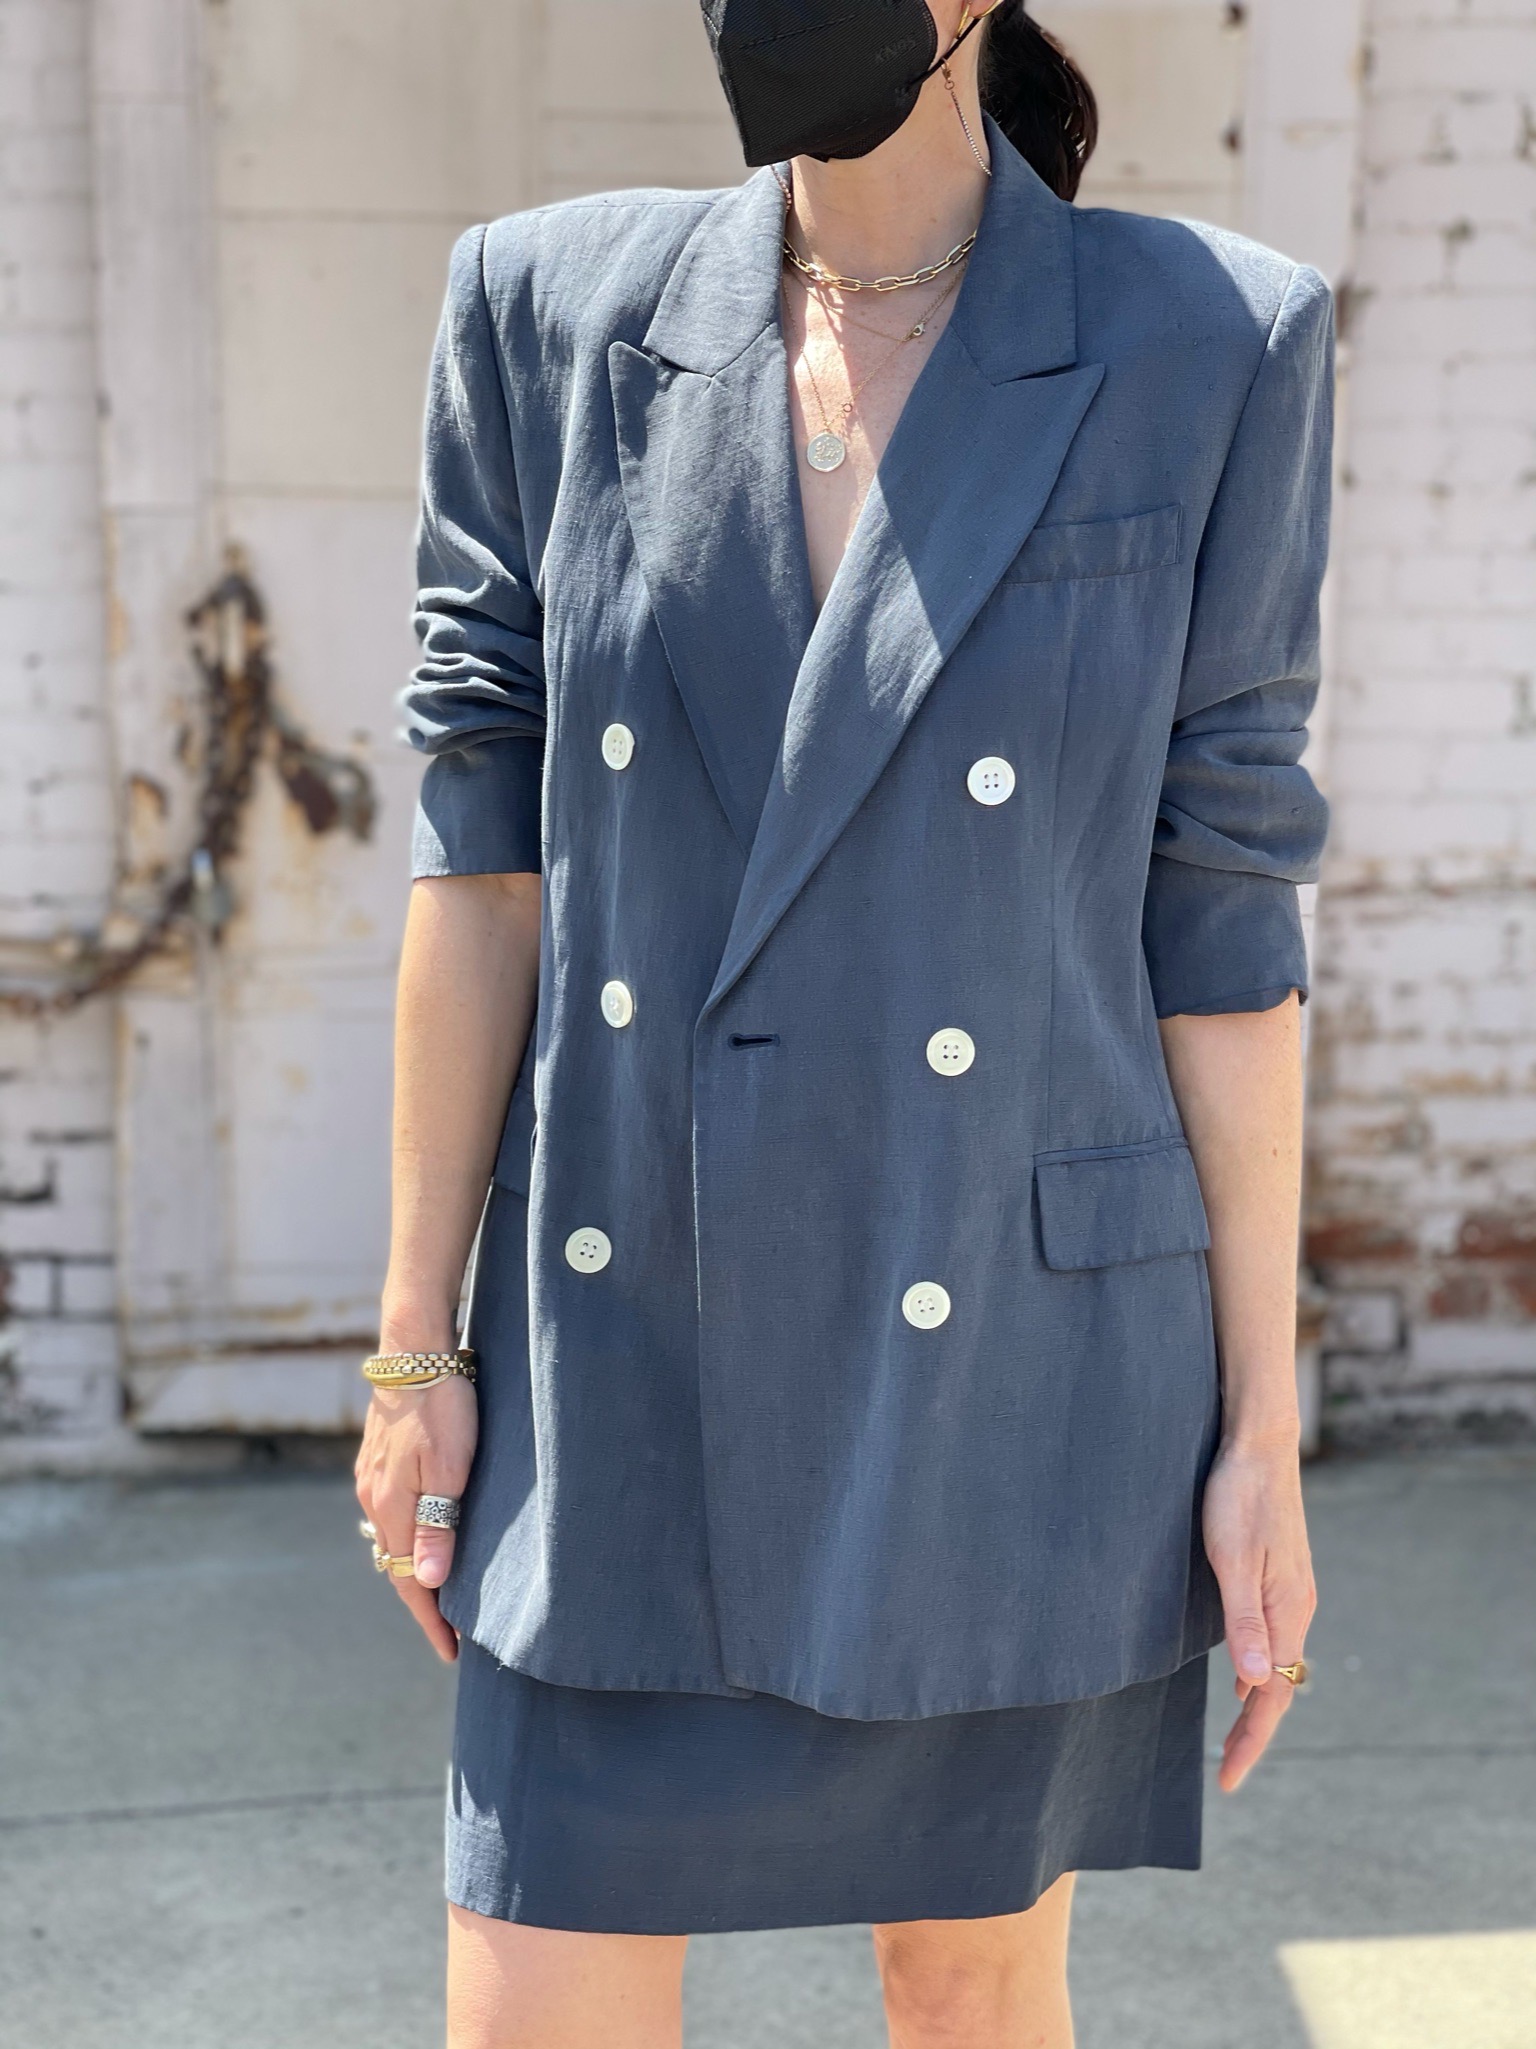 SOLD Jones New York Linen and Silk Suit – Large → Hotbox Vintage